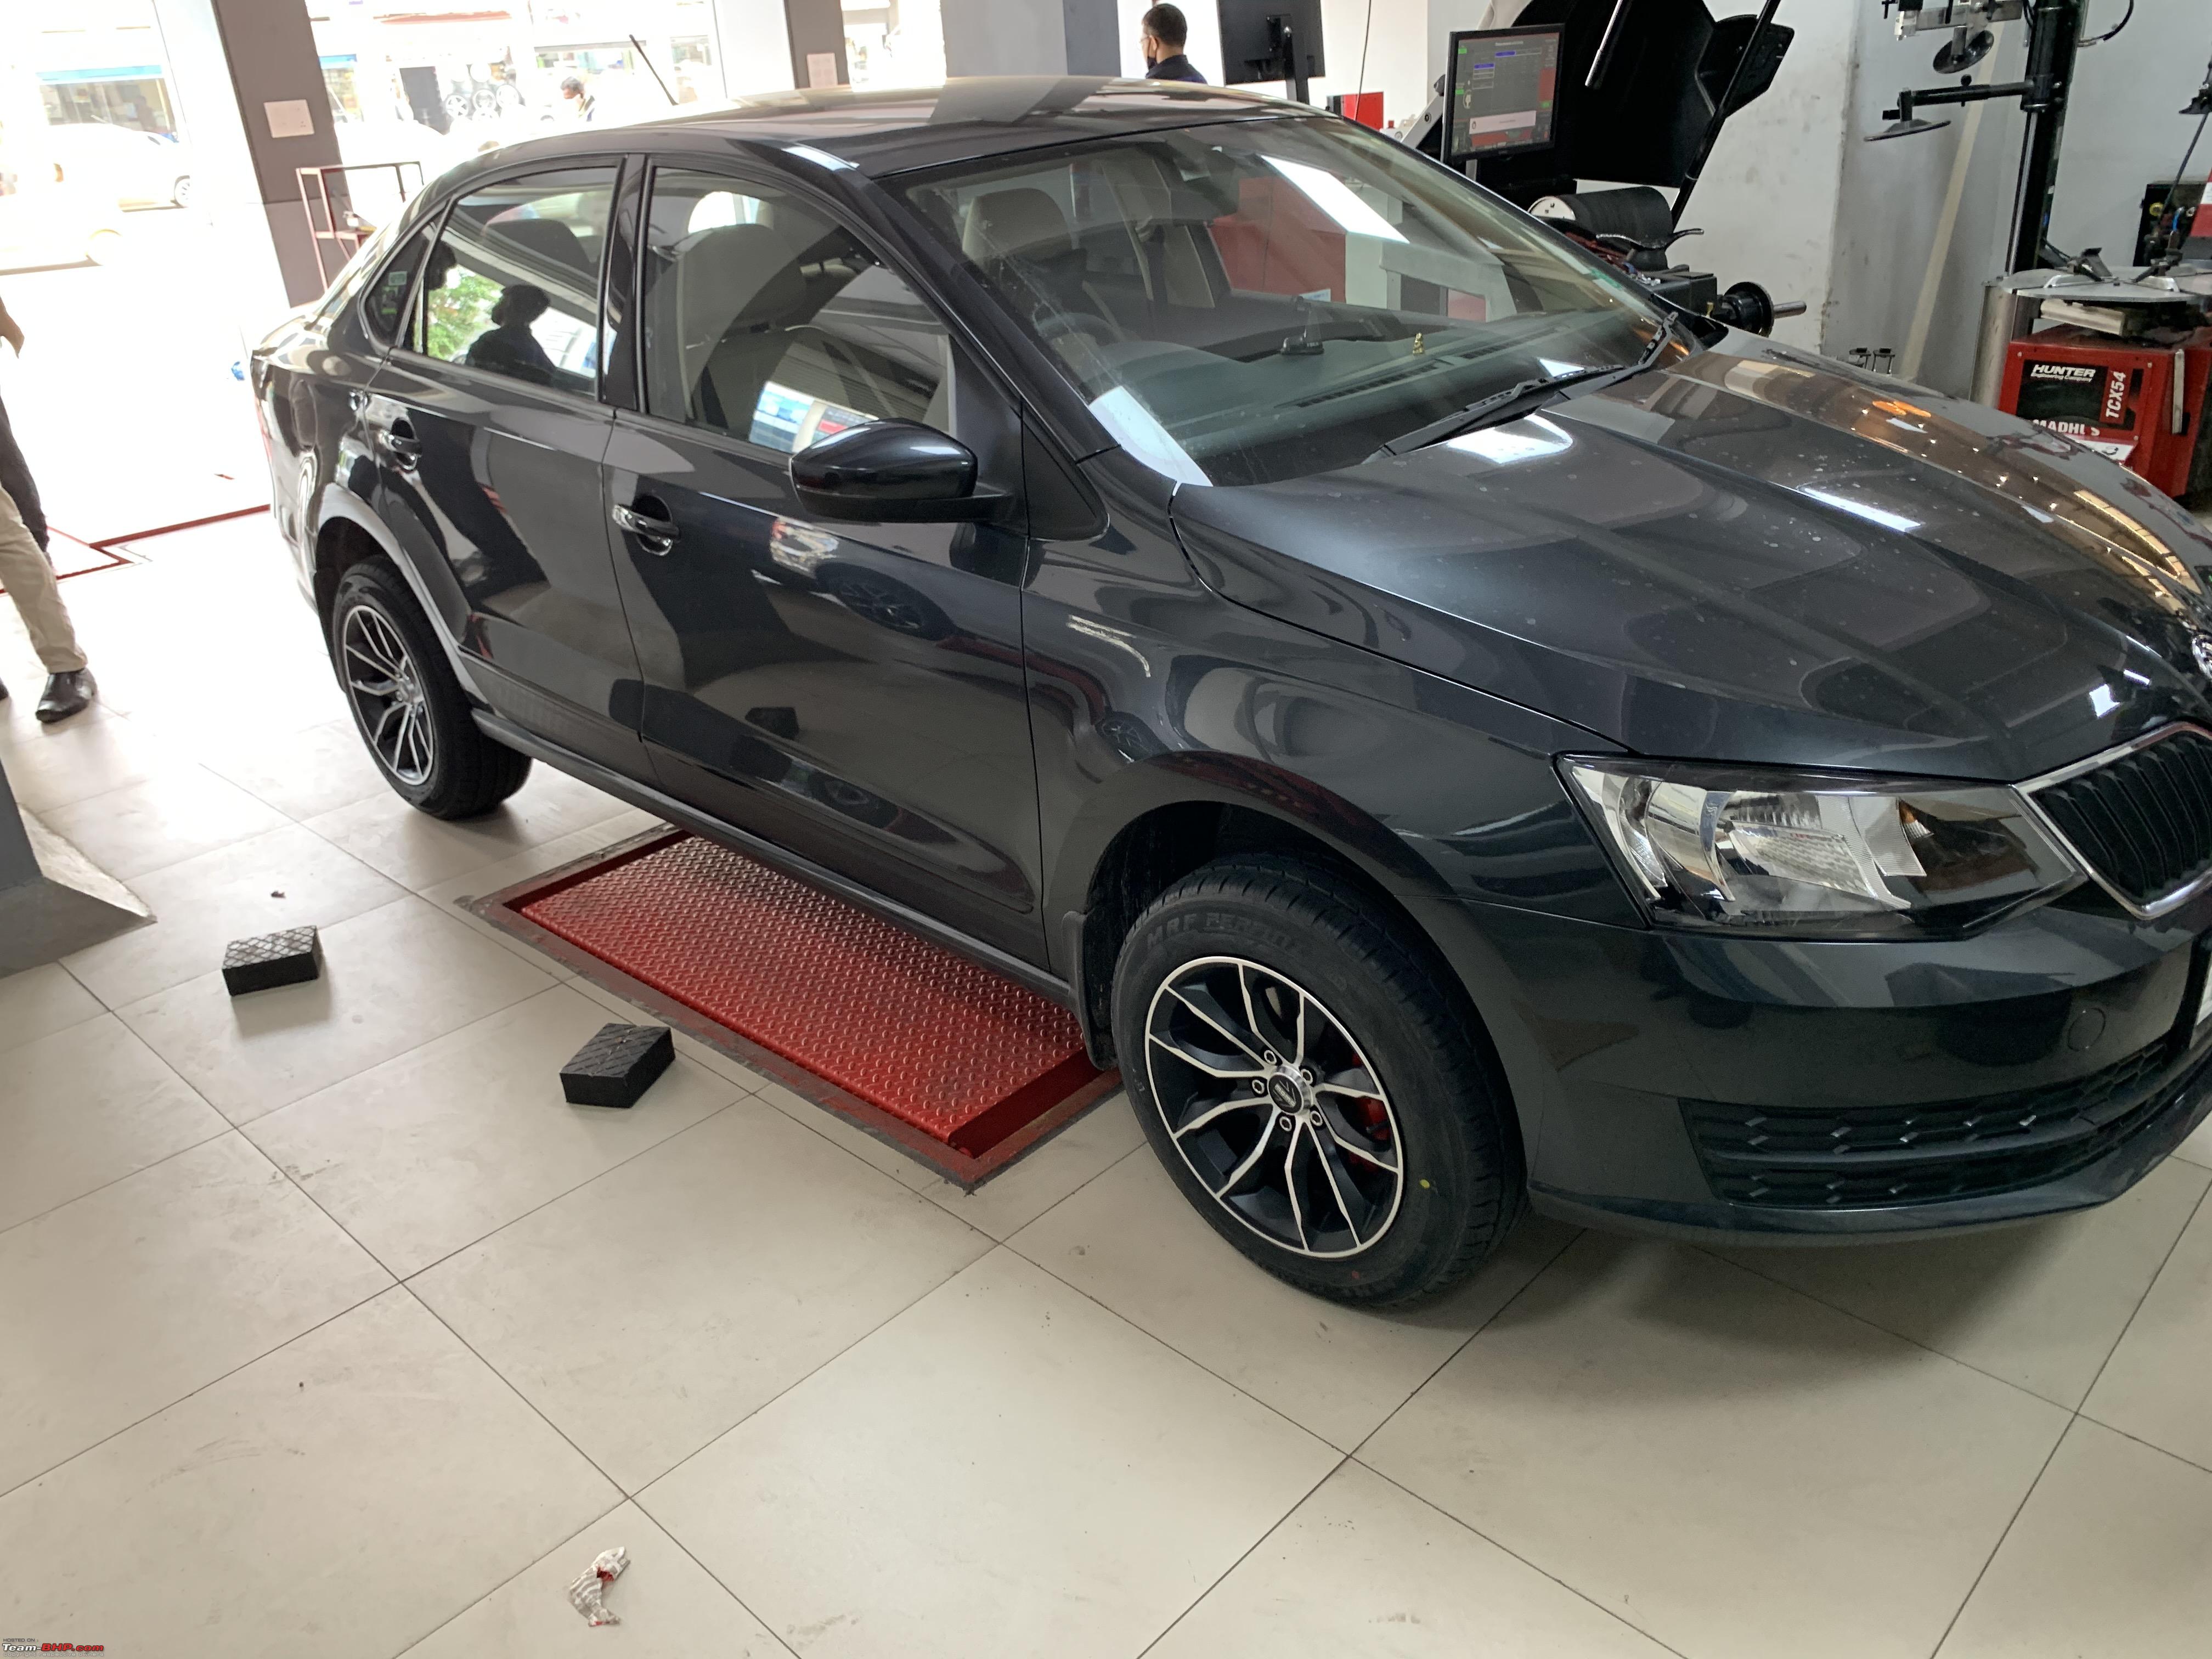 Skoda Rapid 1 0 Tsi Rider Variant Ownership Review The Carbon Steel Beast Comes Home Team Bhp